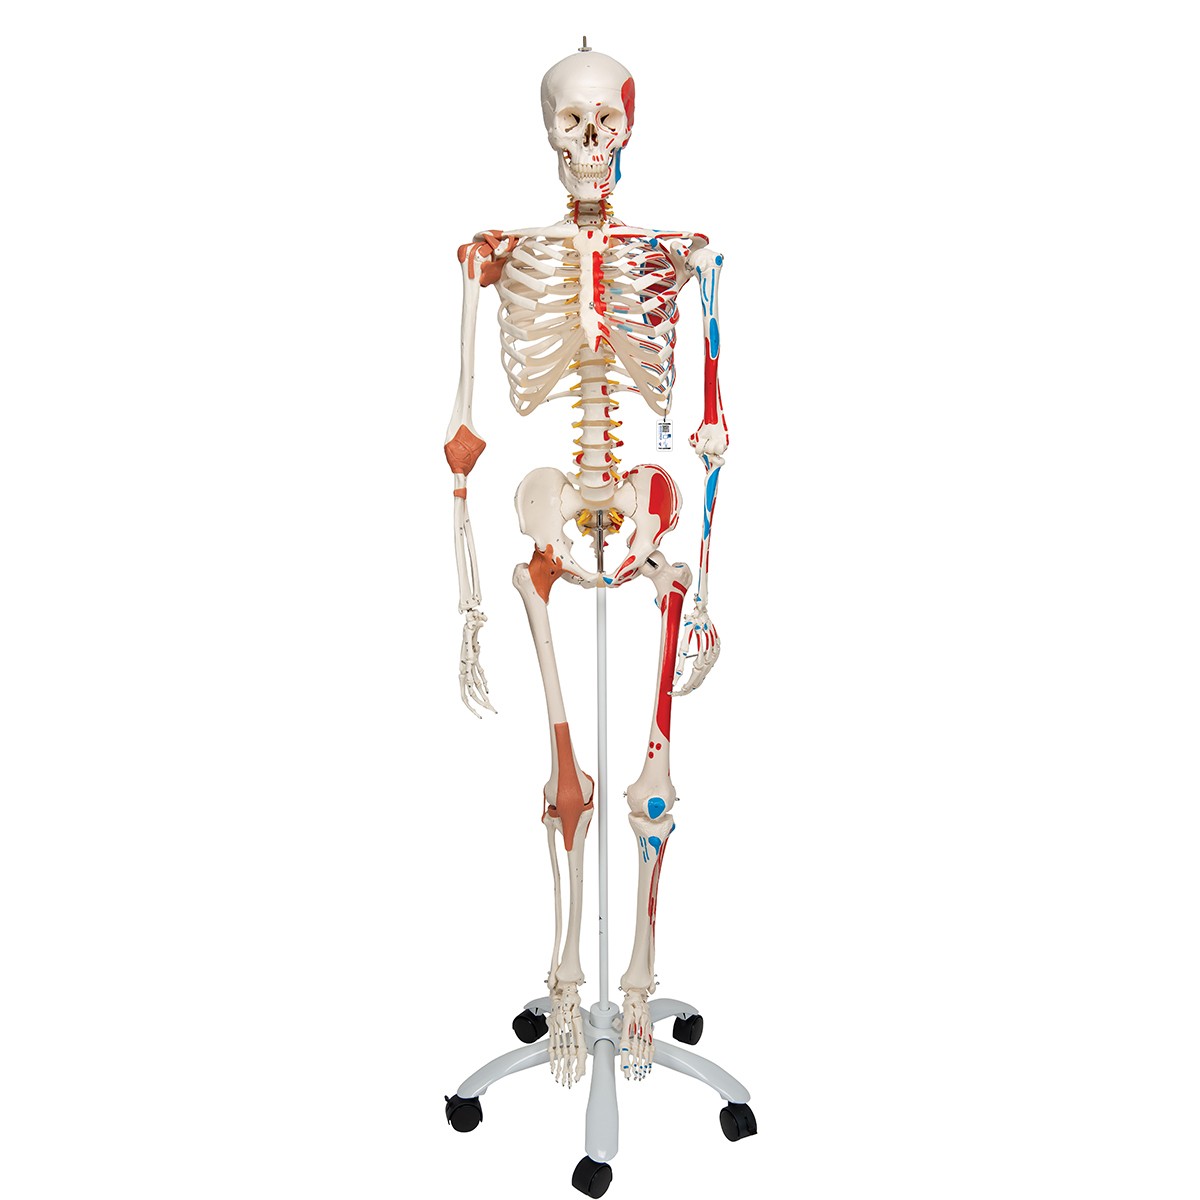 Human Skeleton Model Sam with Muscles Ligaments - 3B Smart Anatomy